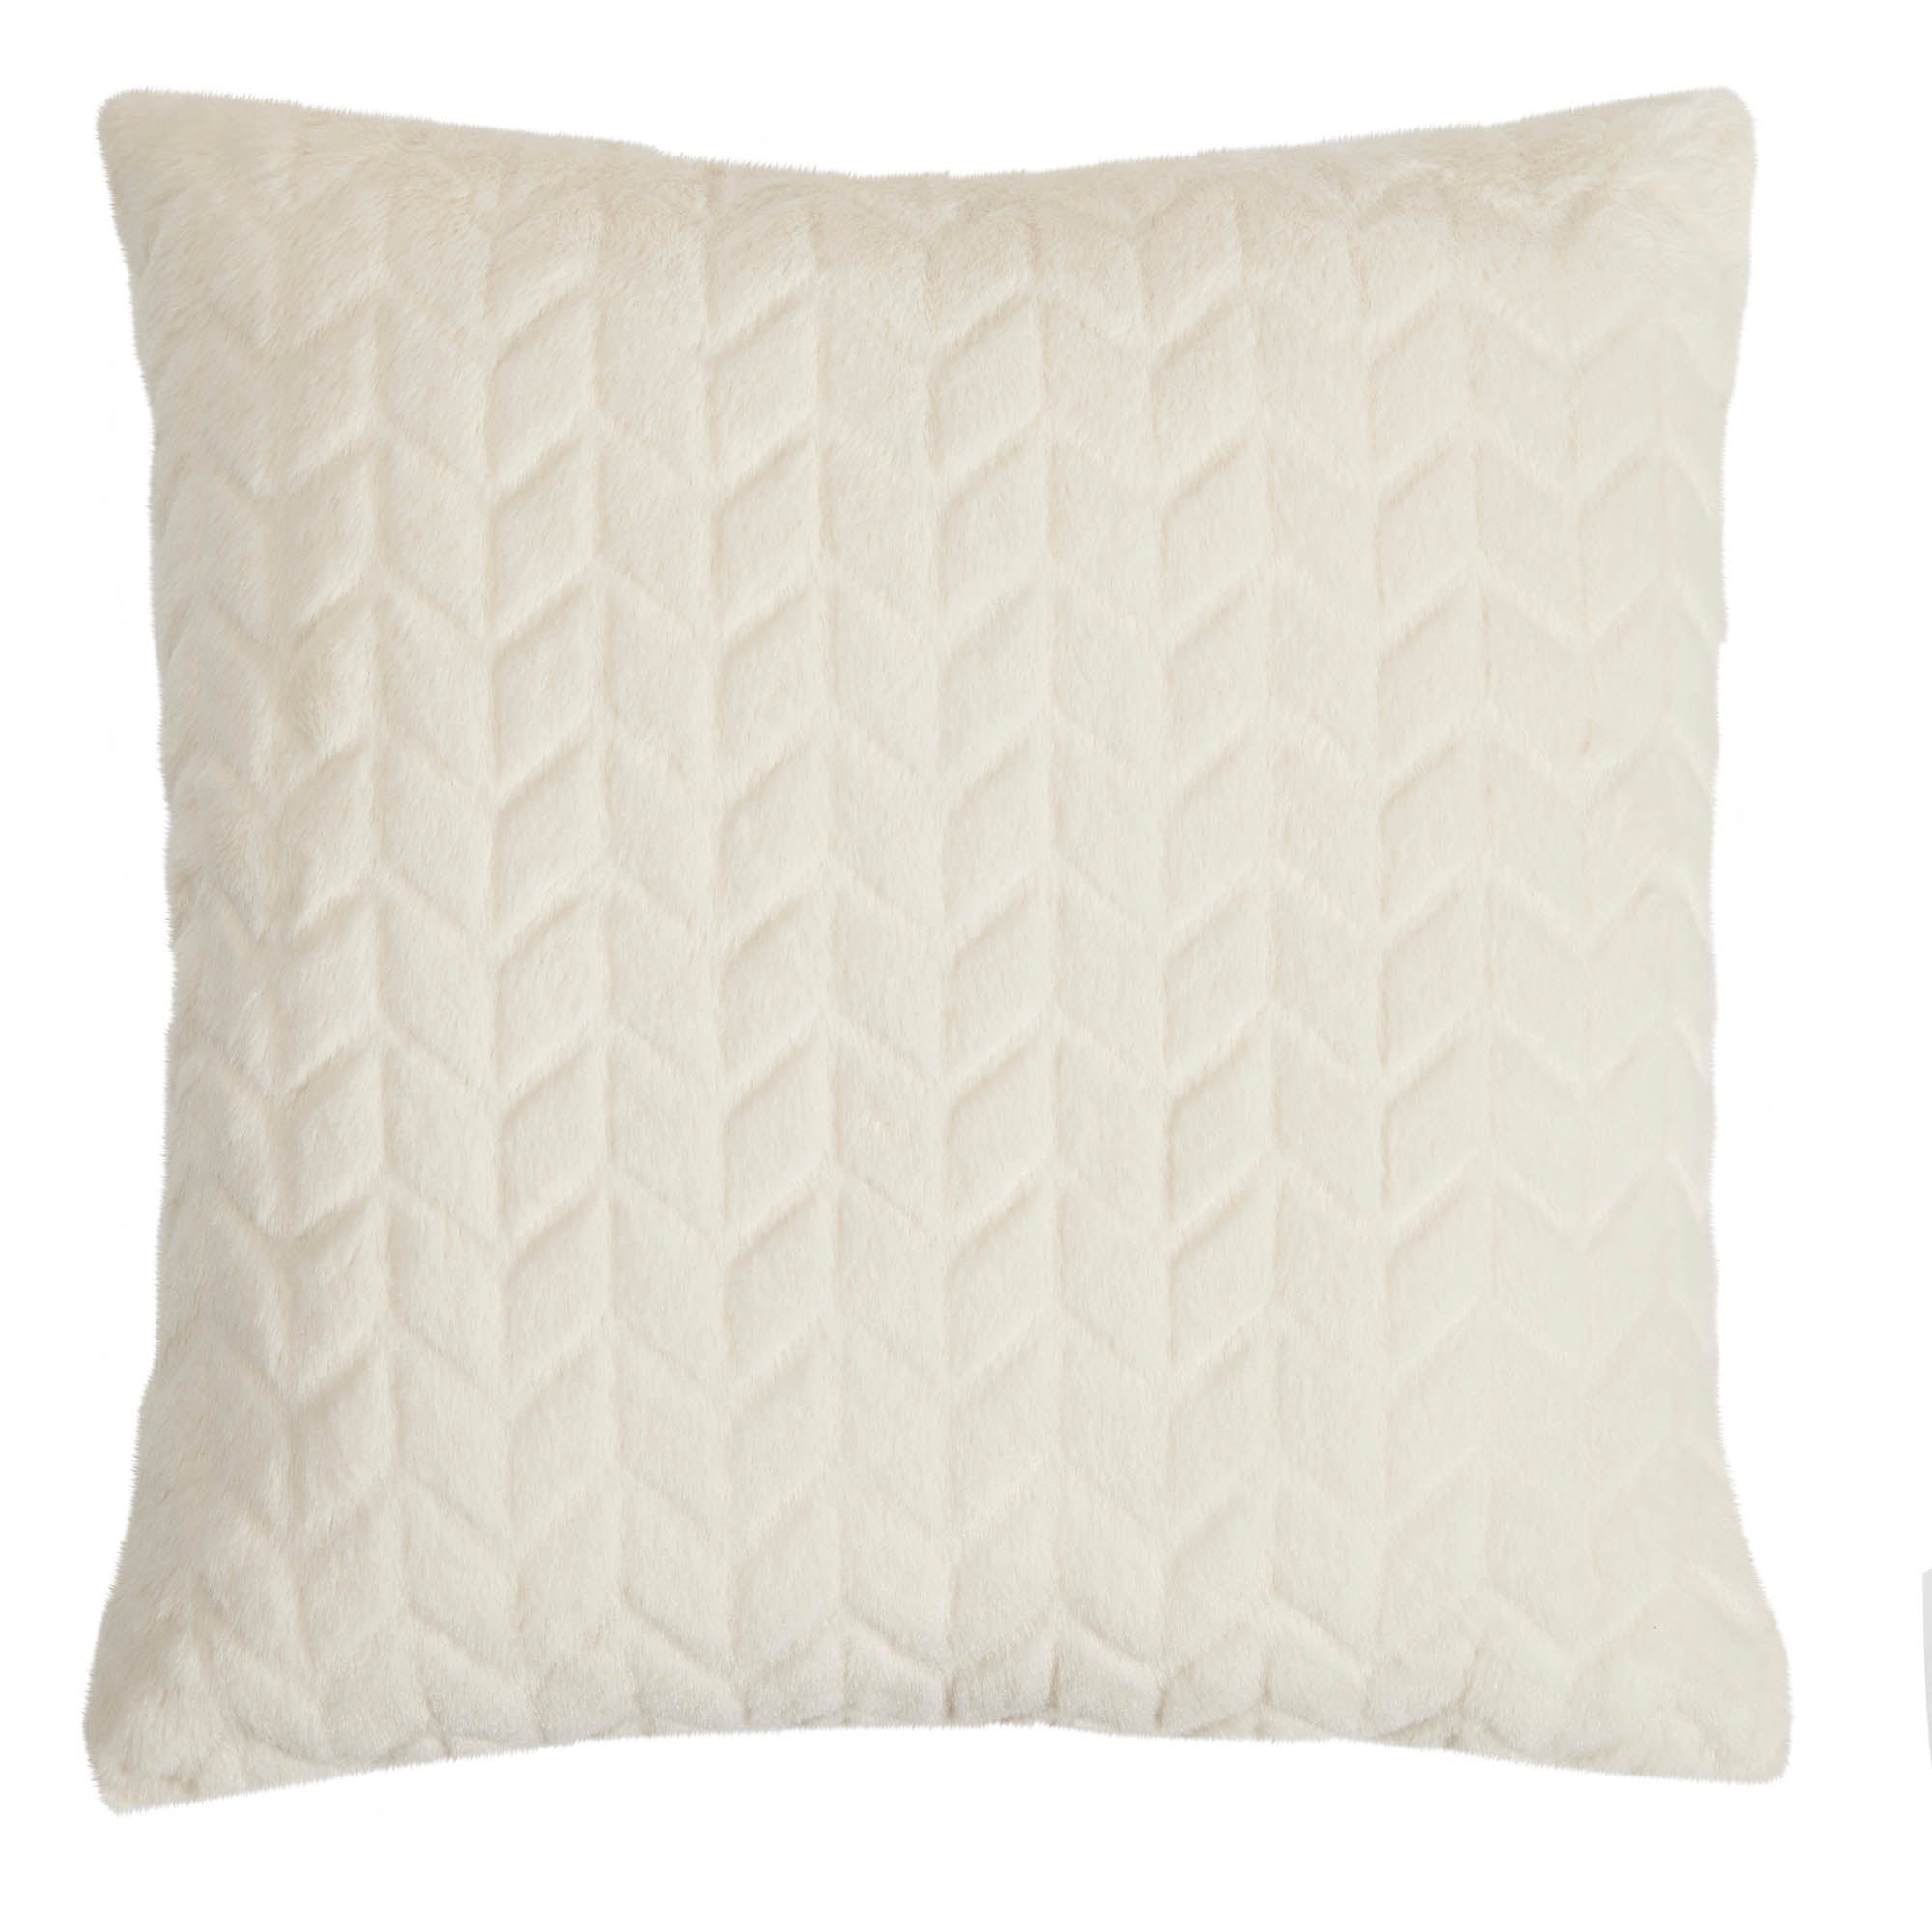 Filled Cushions | Small & Large Filled Cushions | Dunelm - Page 30